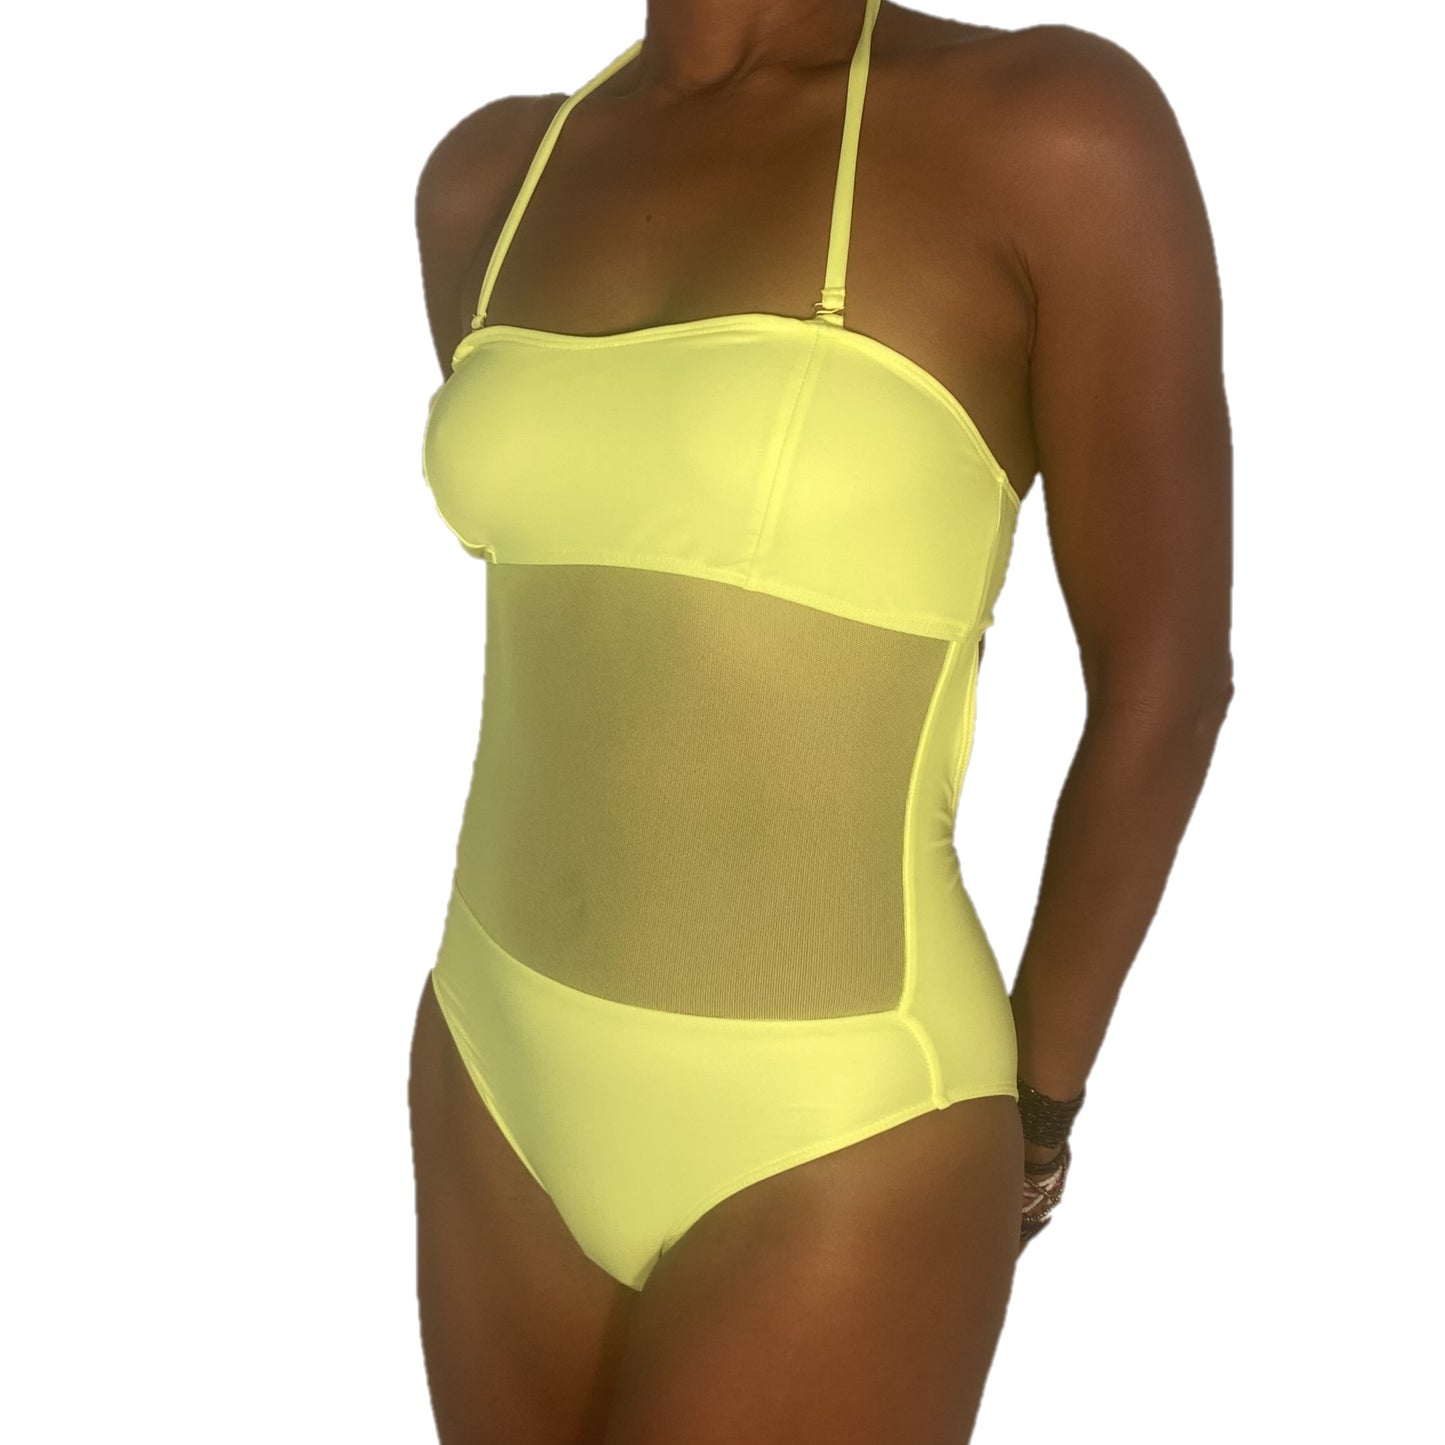 Leme Mesh One Piece Swimsuit in neon yellow